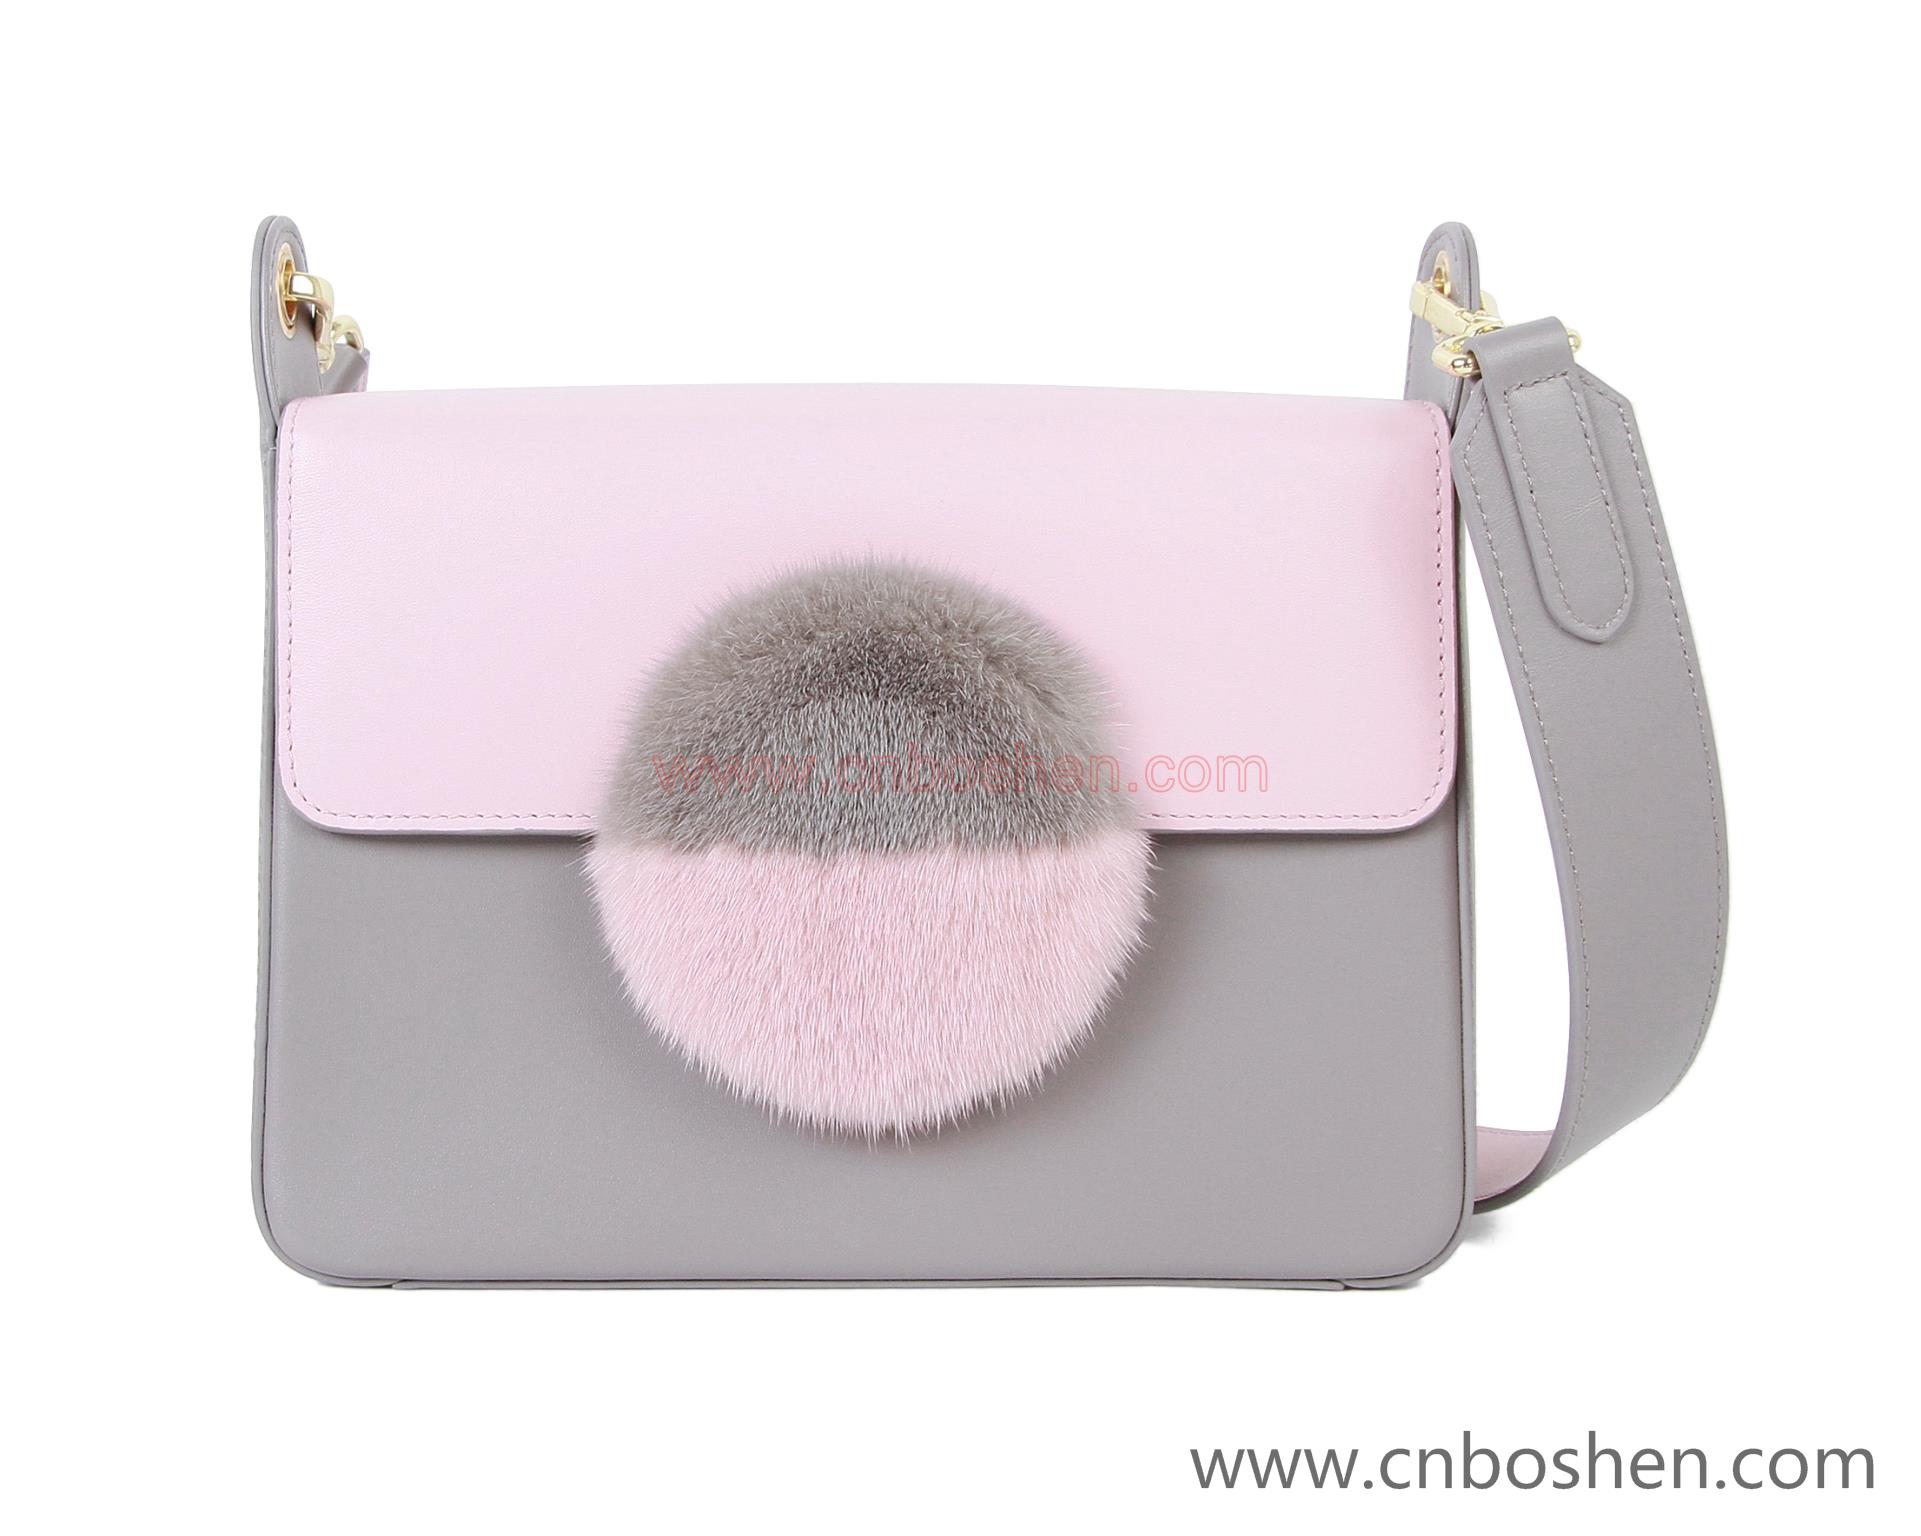 Guangzhou leather goods factories tell you the development history of bags and women